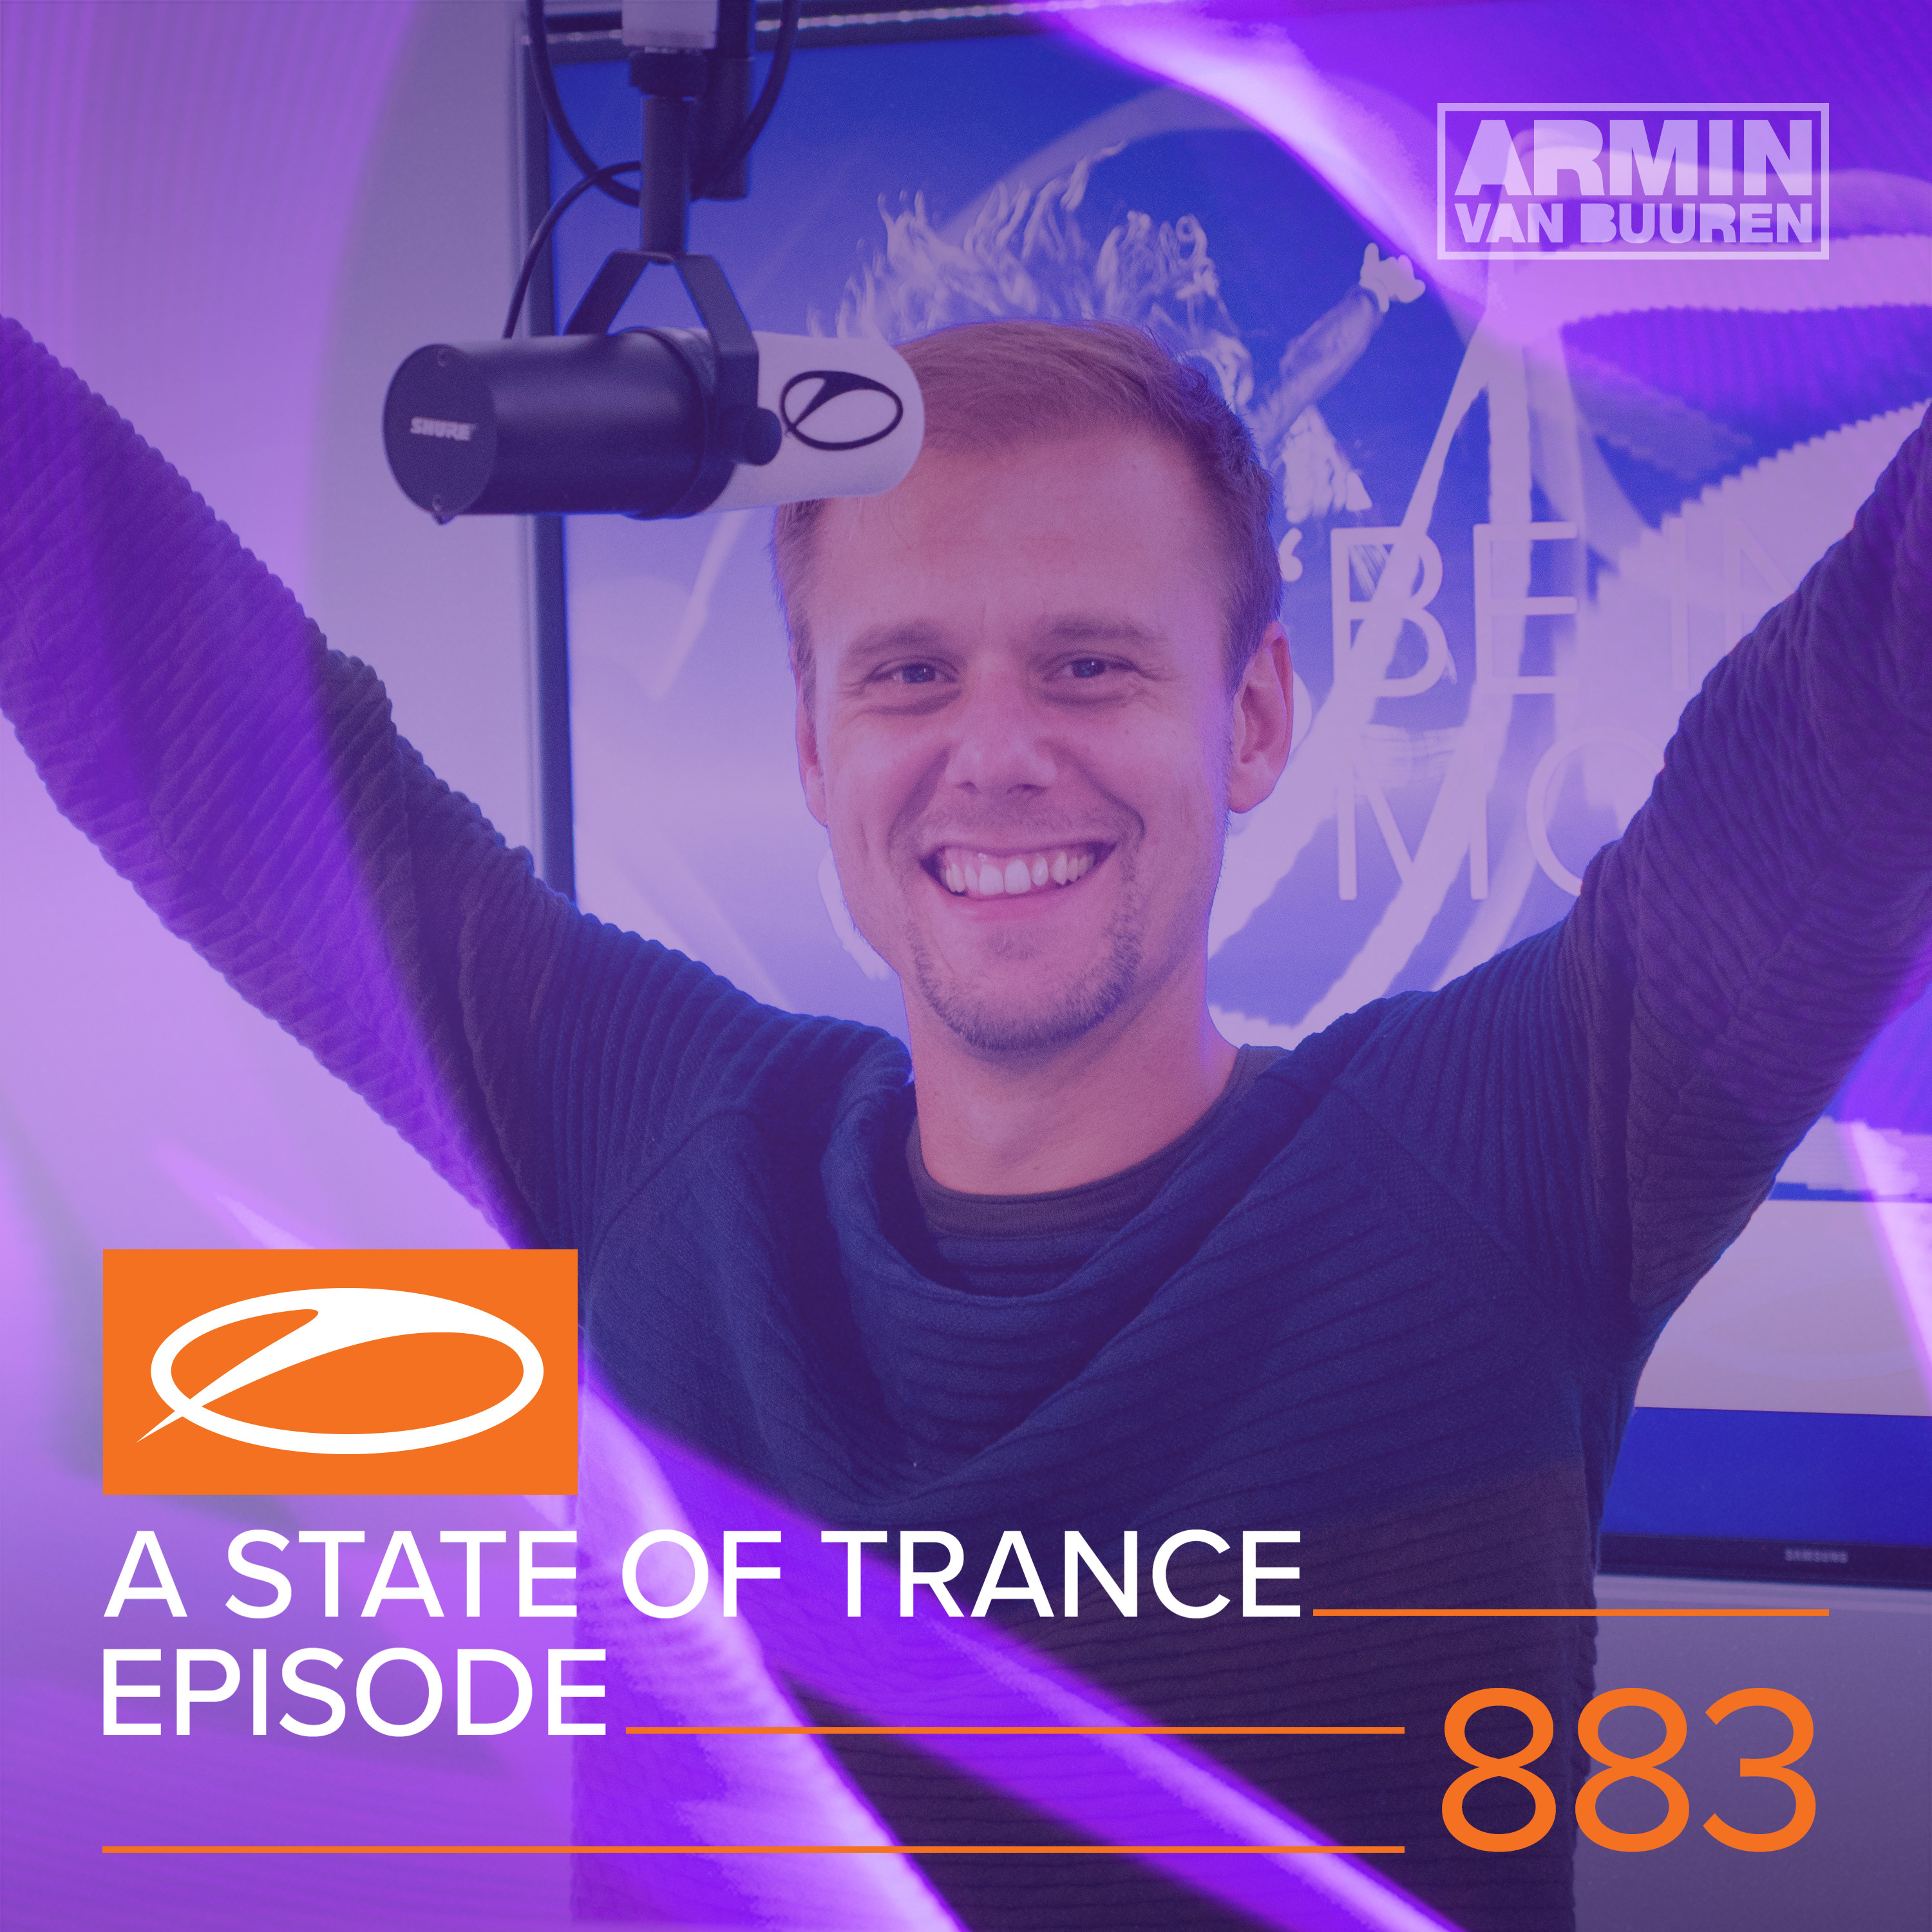 A State Of Trance (ASOT 883) (Coming Up, Pt. 4)